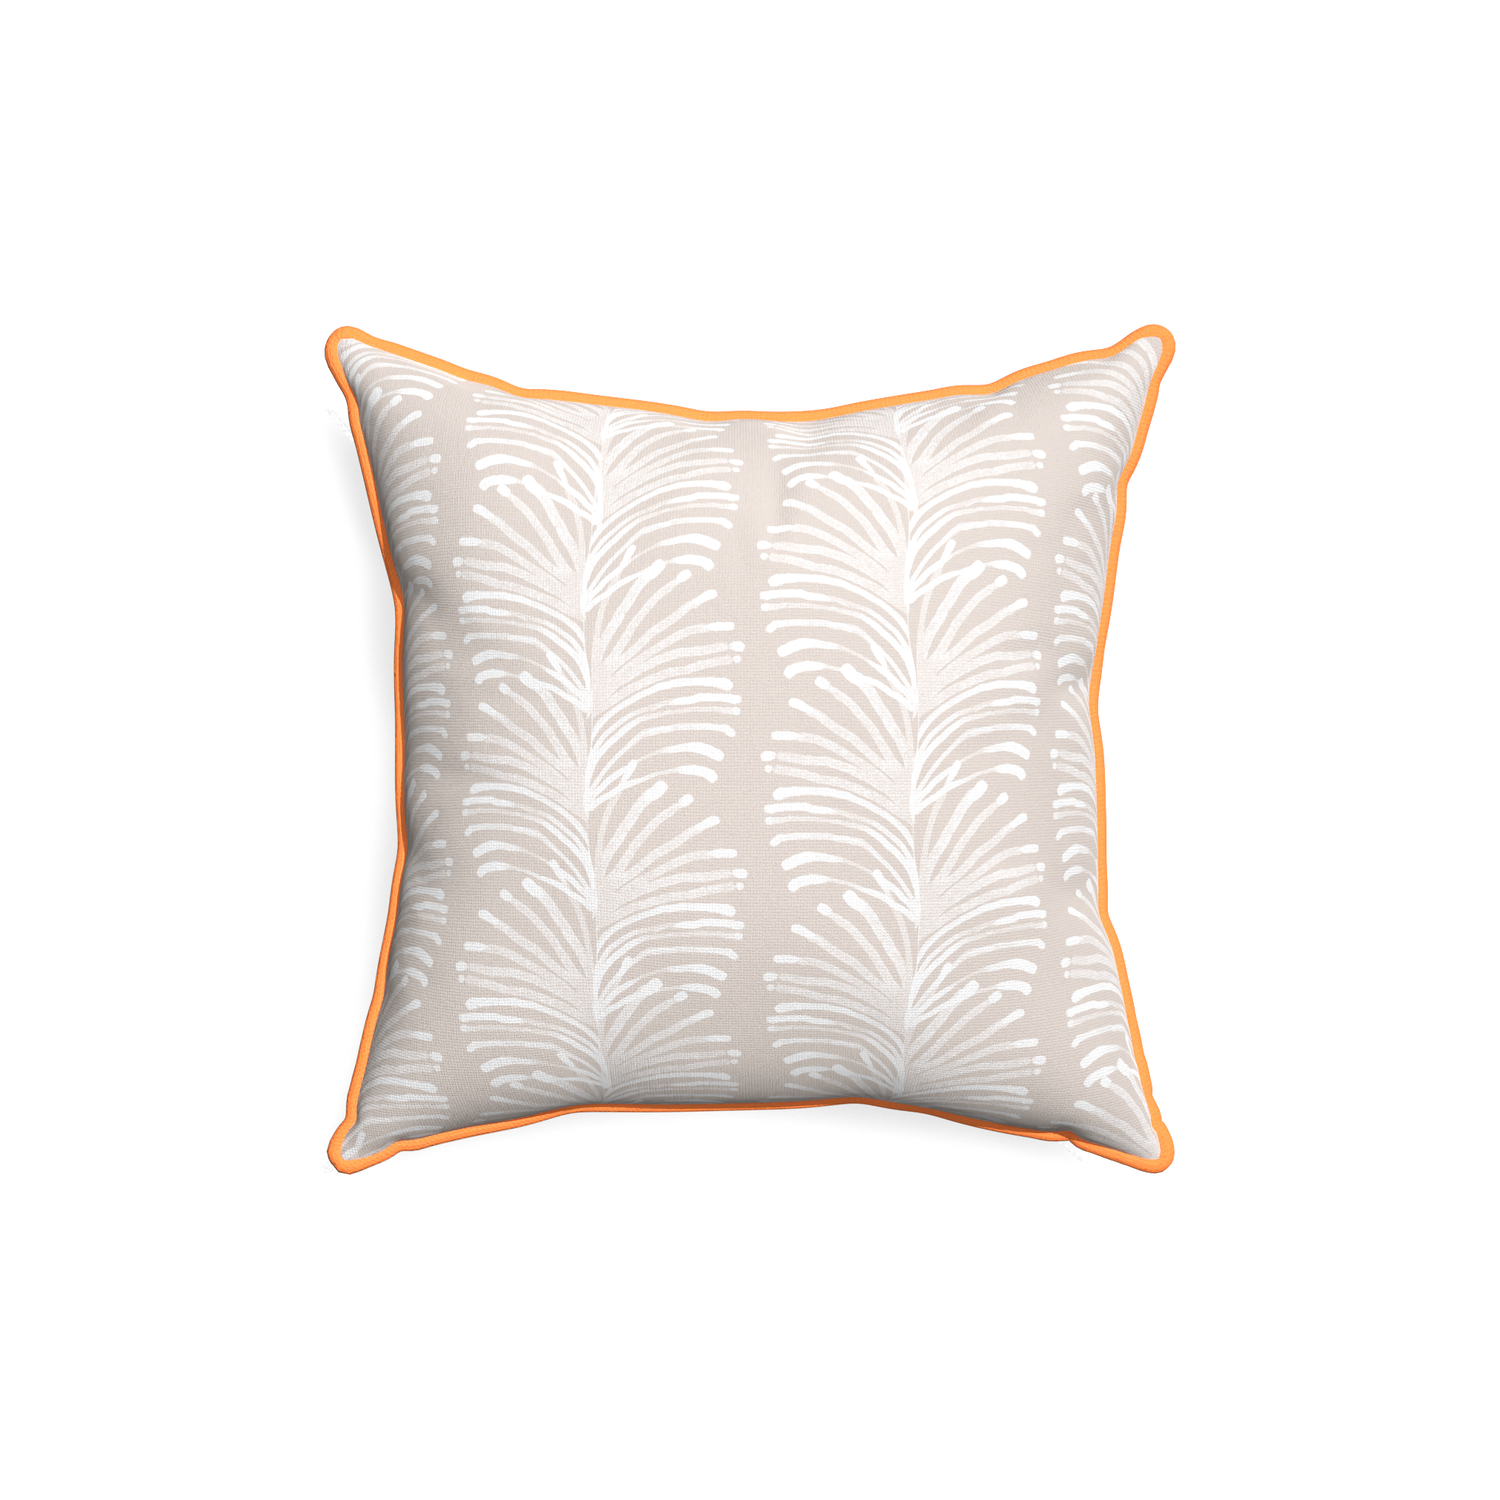 18-square emma sand custom sand colored botanical stripepillow with clementine piping on white background